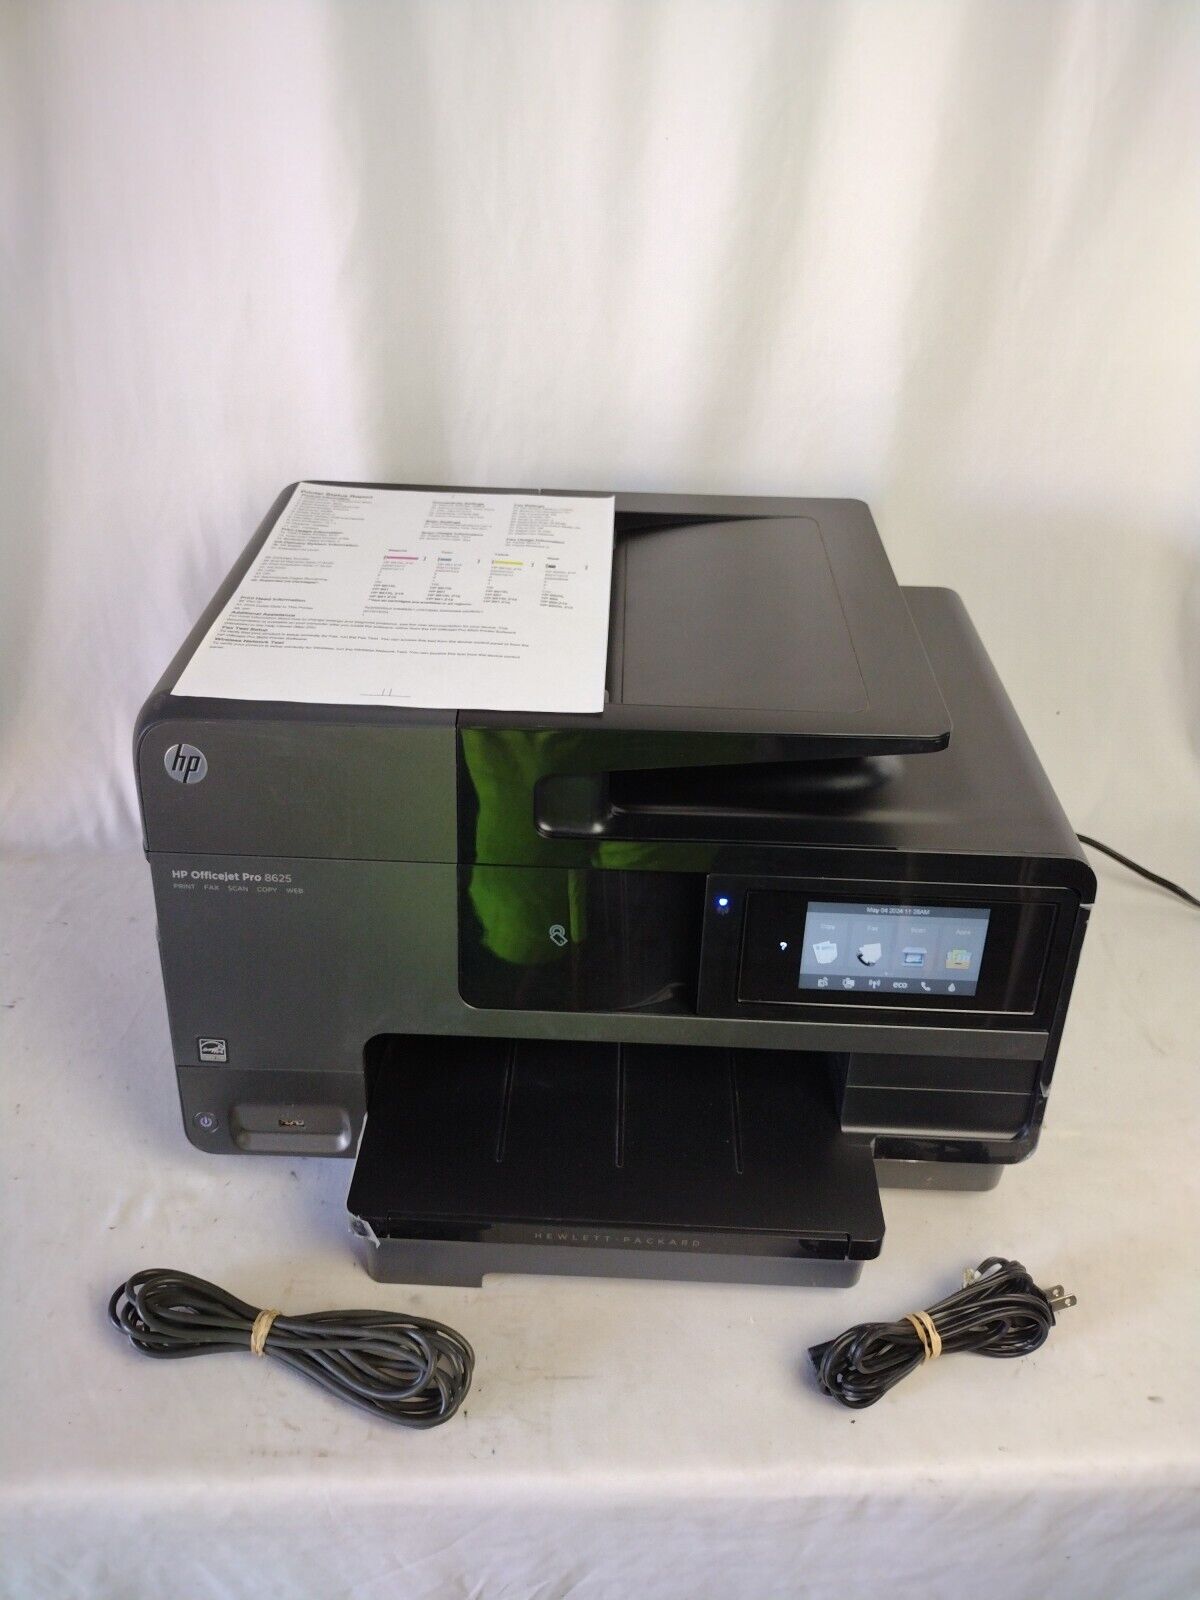 HP Officejet Pro 8625 All-in-One Printer Black Fax Scan Copy Working with Ink